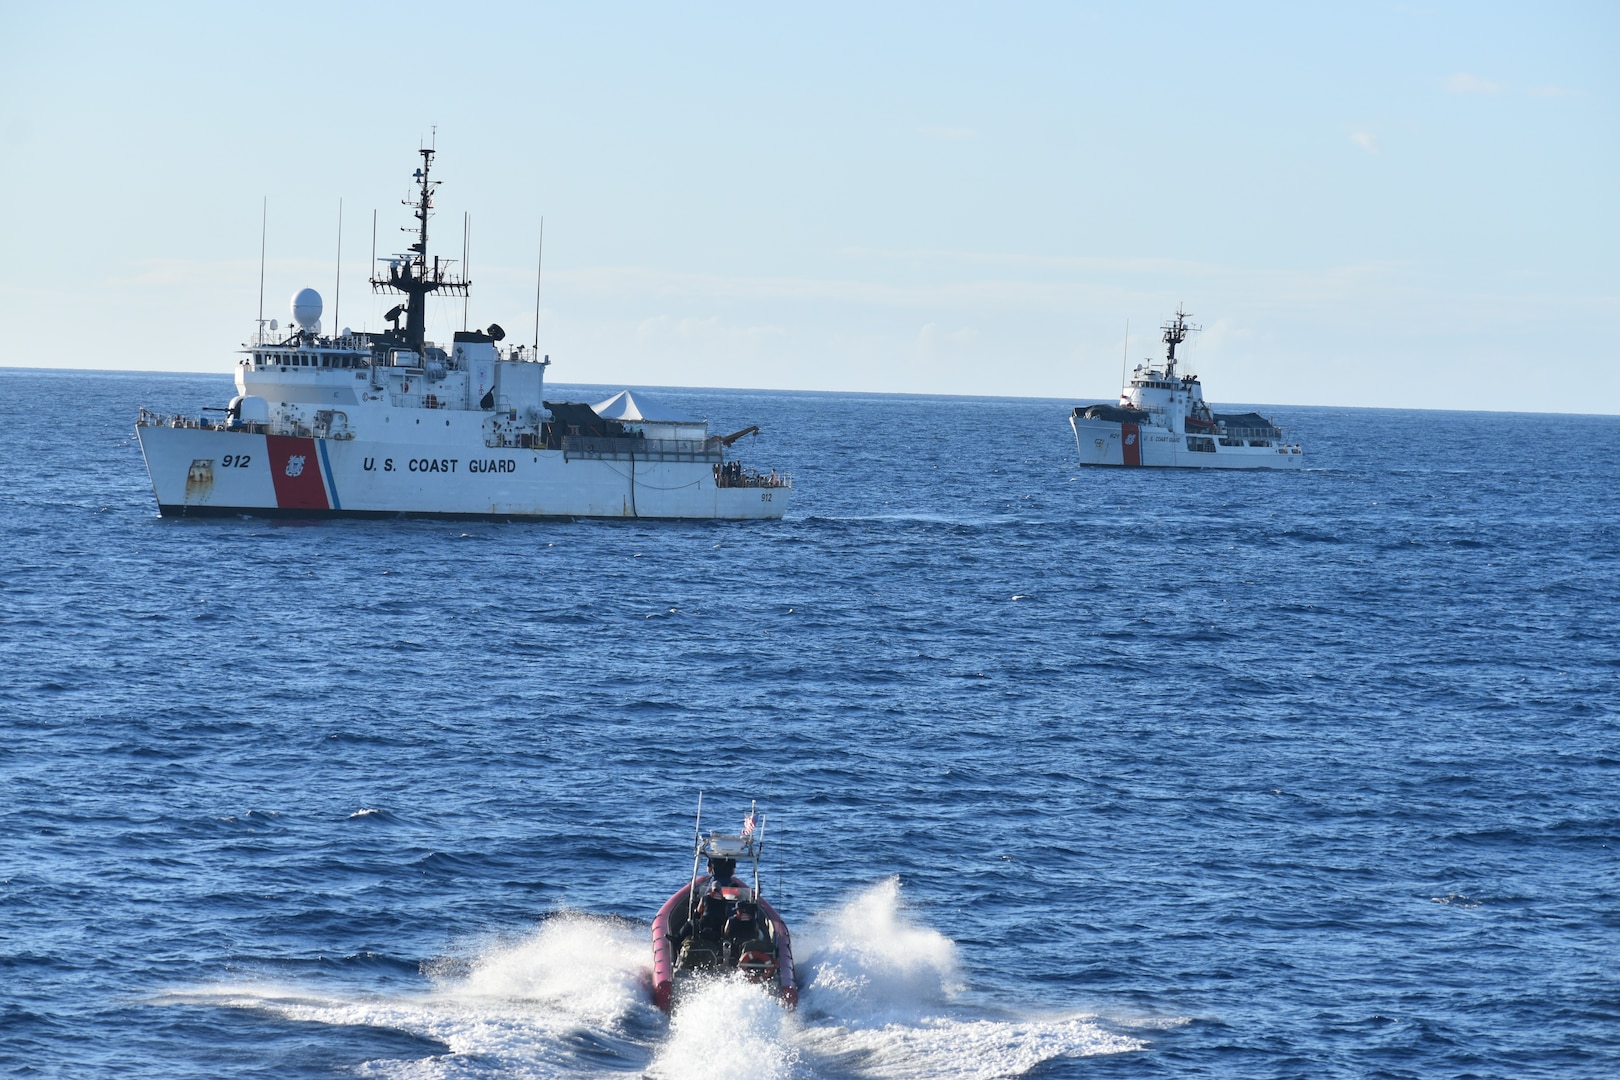 A USCGC Dependable (WMEC 626) small boat crew operates alongside USCGC Legare (WMEC 912) and USCGC Valiant (WMEC 621) in support of Operation Vigilant Sentry off the coast of Haiti, Jan. 27, 2023. Dependable’s crew patrolled the Coast Guard’s Seventh District area of operations to conduct maritime safety and security missions. (U.S. Coast Guard photo by Ensign Hannah Jamison)